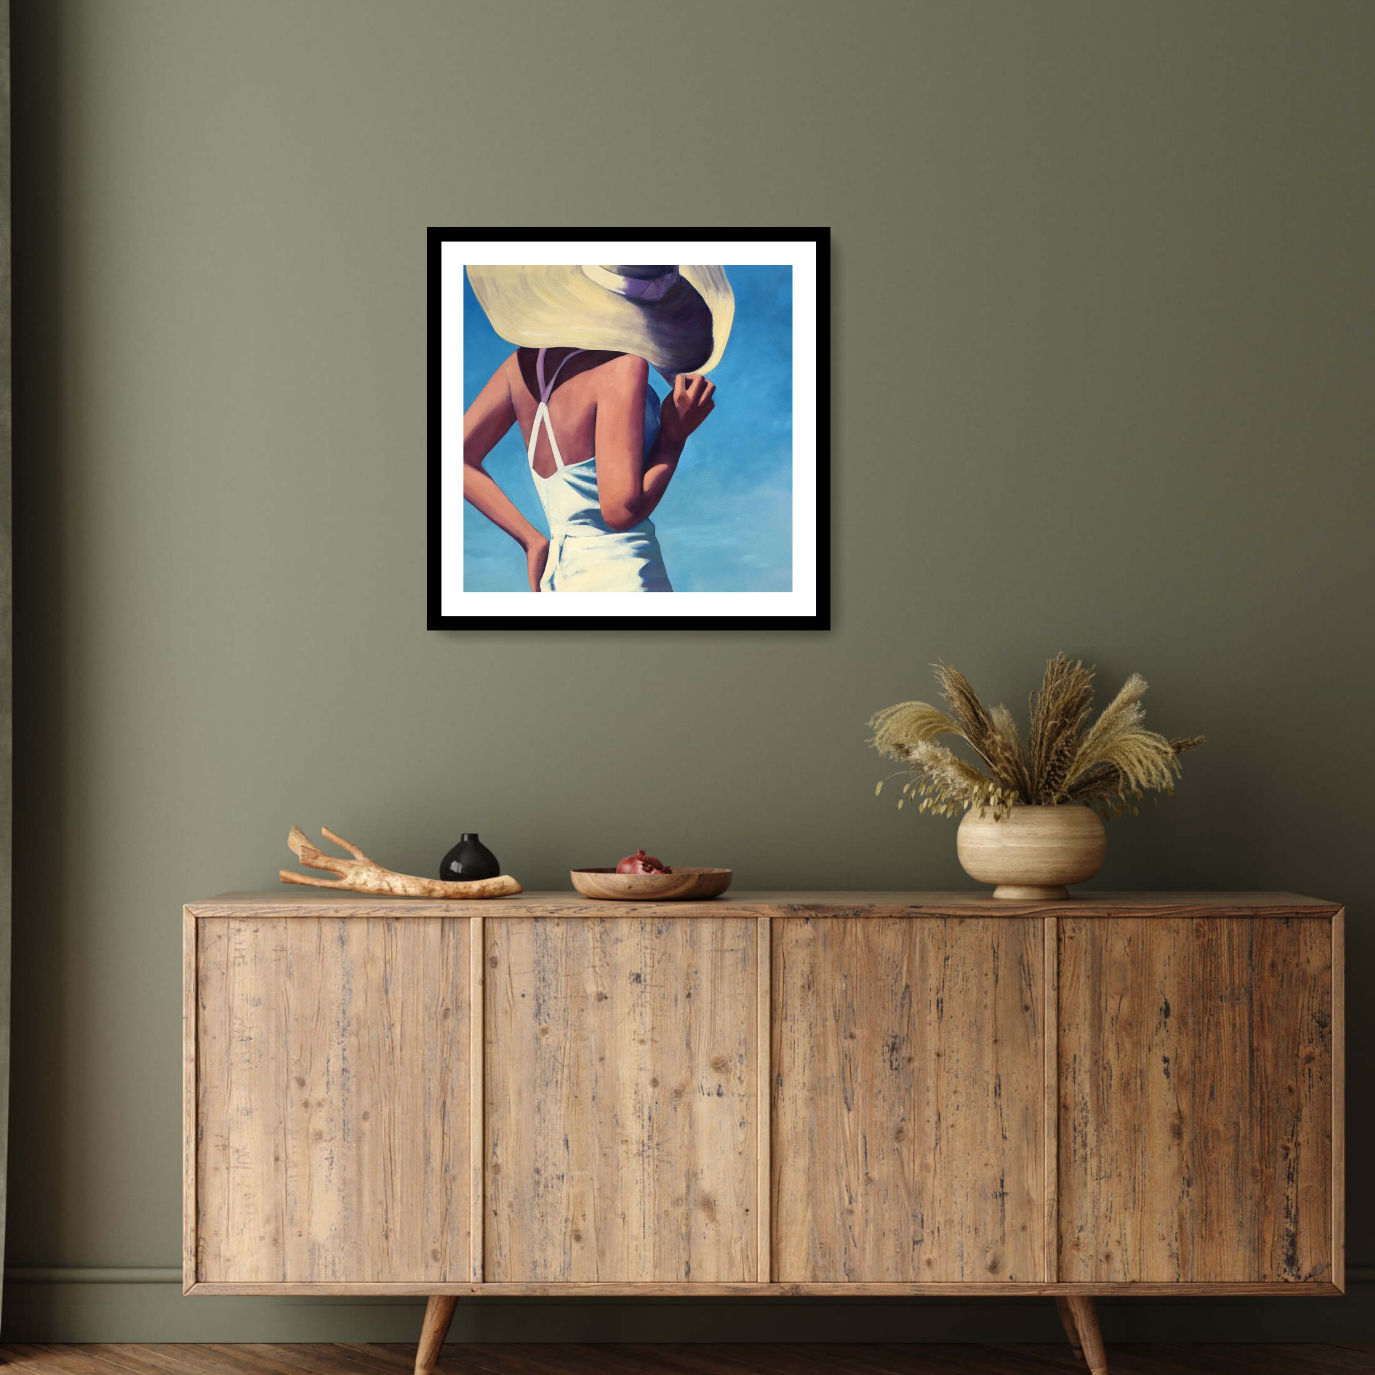 "Sunlight" by T.S. Harris beautifully blends nostalgia with vibrant hues, depicting a woman in white against a serene blue backdrop. One hand rests on her hip while the other adjusts her sunhat. Hangs framed in black elegant interior.